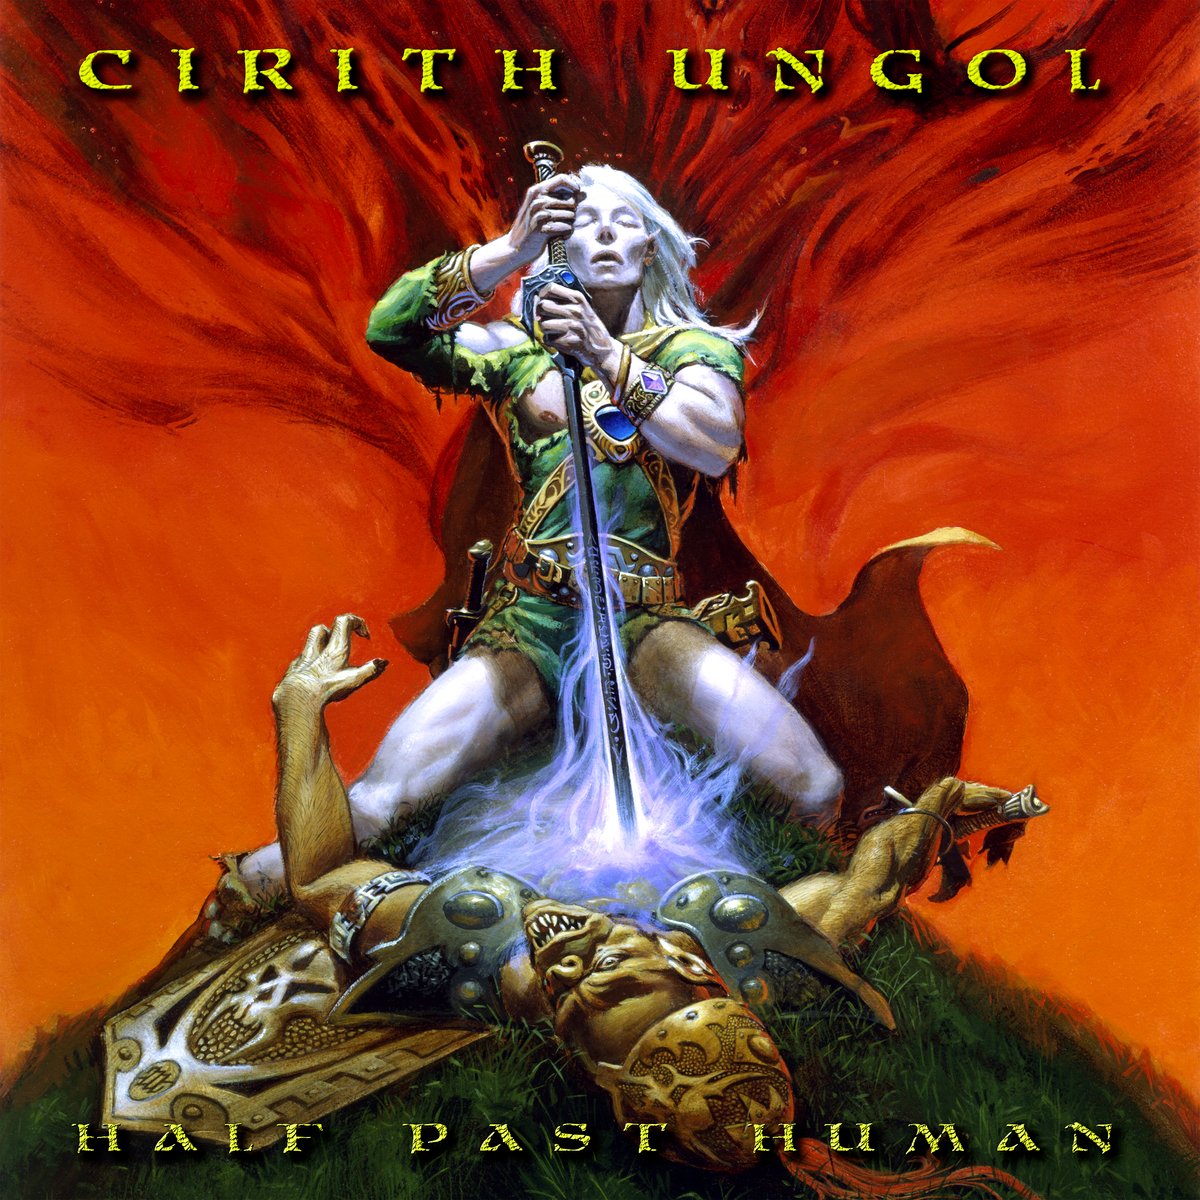 E2Z BZ3VEAInCh3 RT @MetalBlade: Legions! @dbmagazine is giving you an early listen of the new @CirithU EP, #HalfPastHuman NOW! Hear this masterp... | Cirith Ungol Online